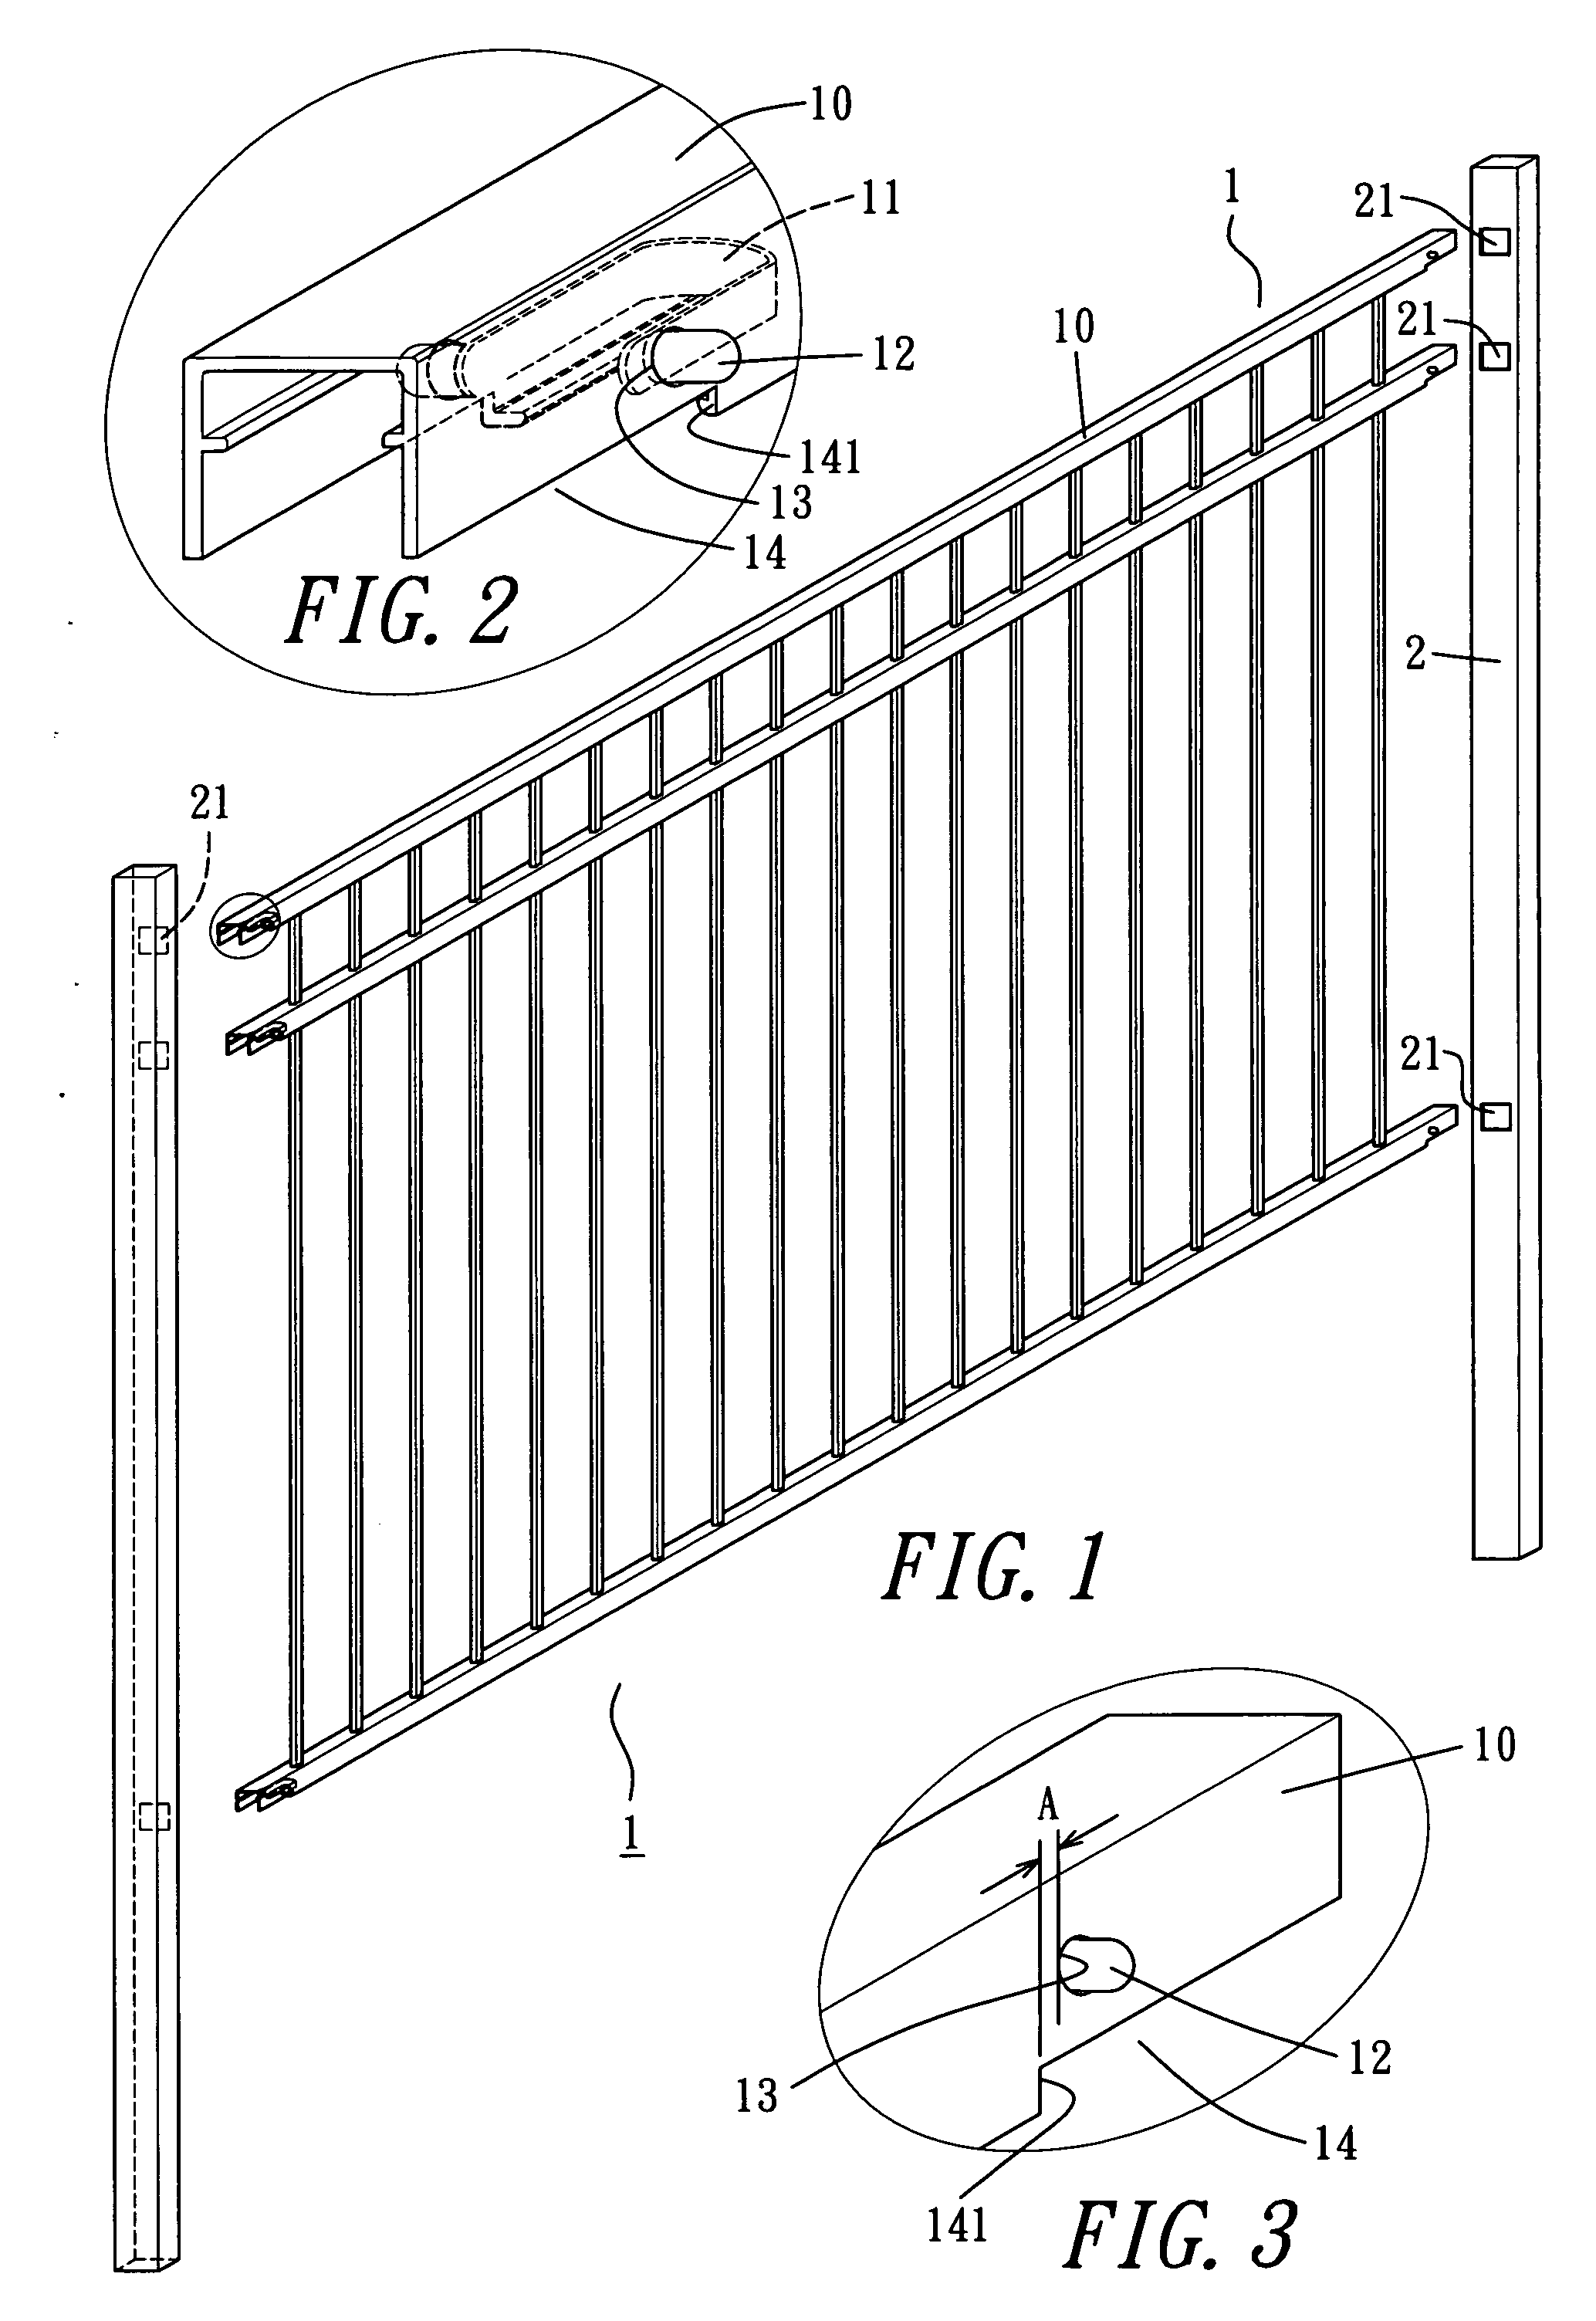 Post and rod linking device for a railing